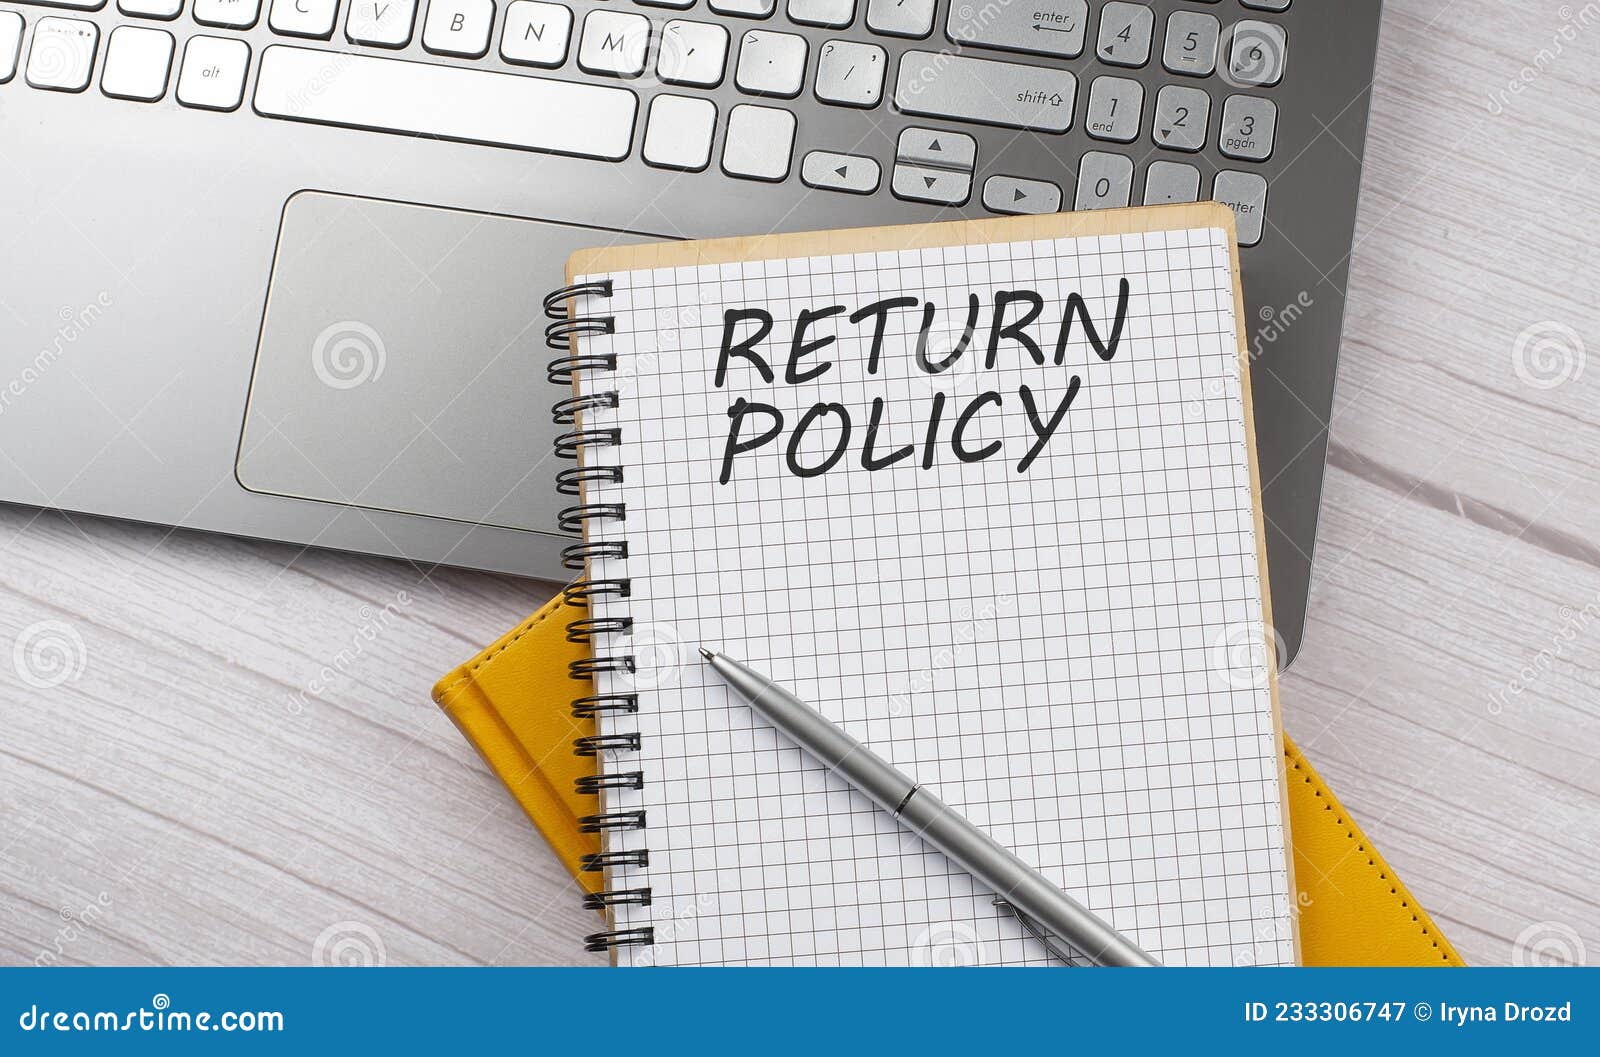 return policy text written on a notebook on the laptop,business